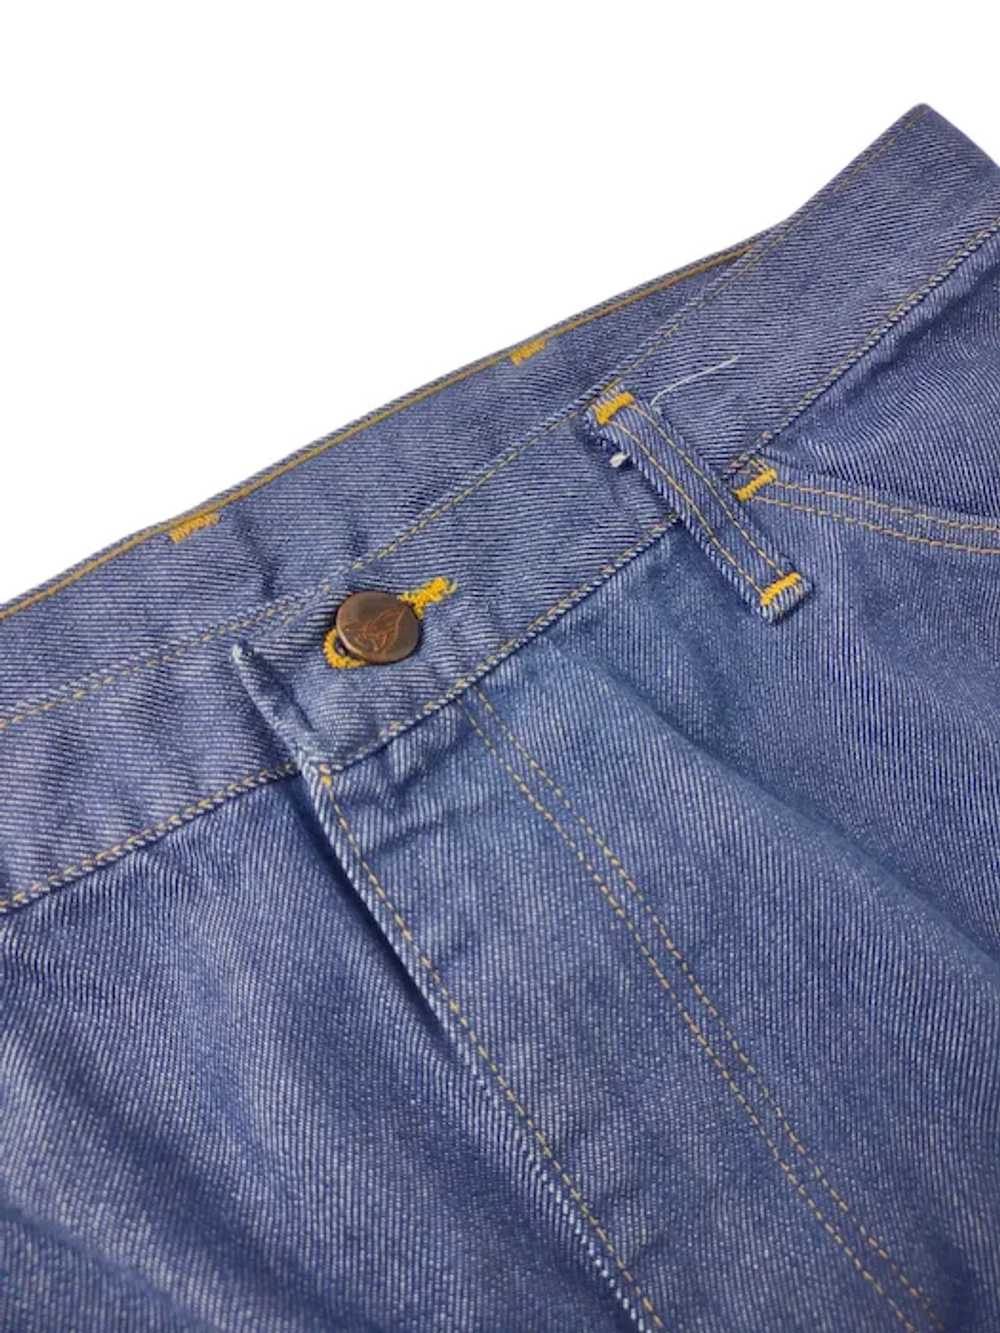 Vintage RED KAP Work Jeans Made in USA Durable Pr… - image 3